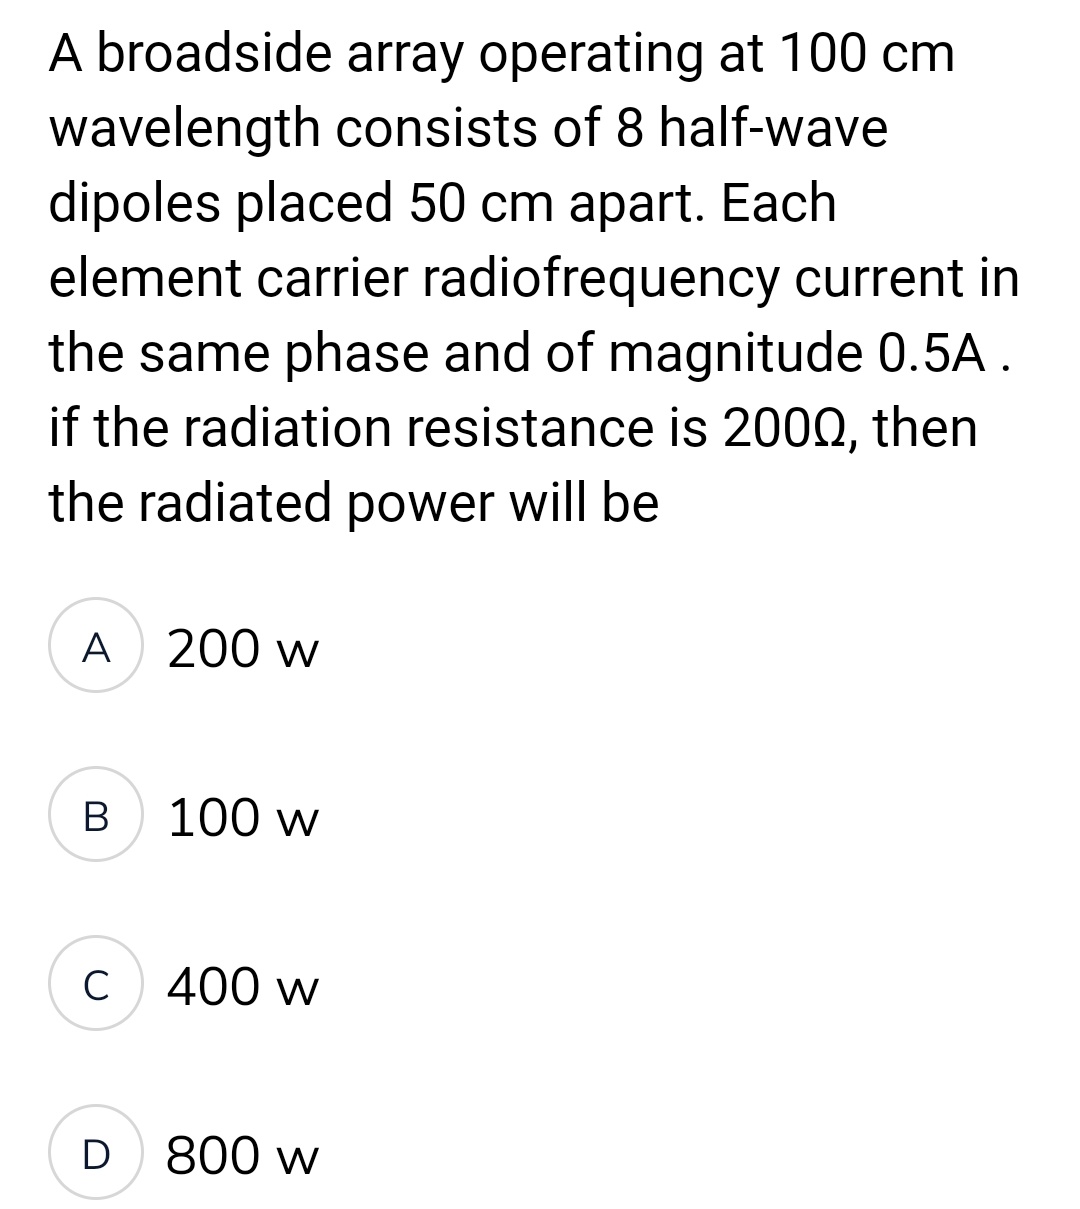 A broadside array operating at 100 cm
wavelength consists of 8 half-wave
dipoles placed 50 cm apart. Each
element carrier radiofrequency current in
the same phase and of magnitude 0.5A .
if the radiation resistance is 2000, then
the radiated power will be
A 200 w
B
C
D
100 w
400 w
800 w